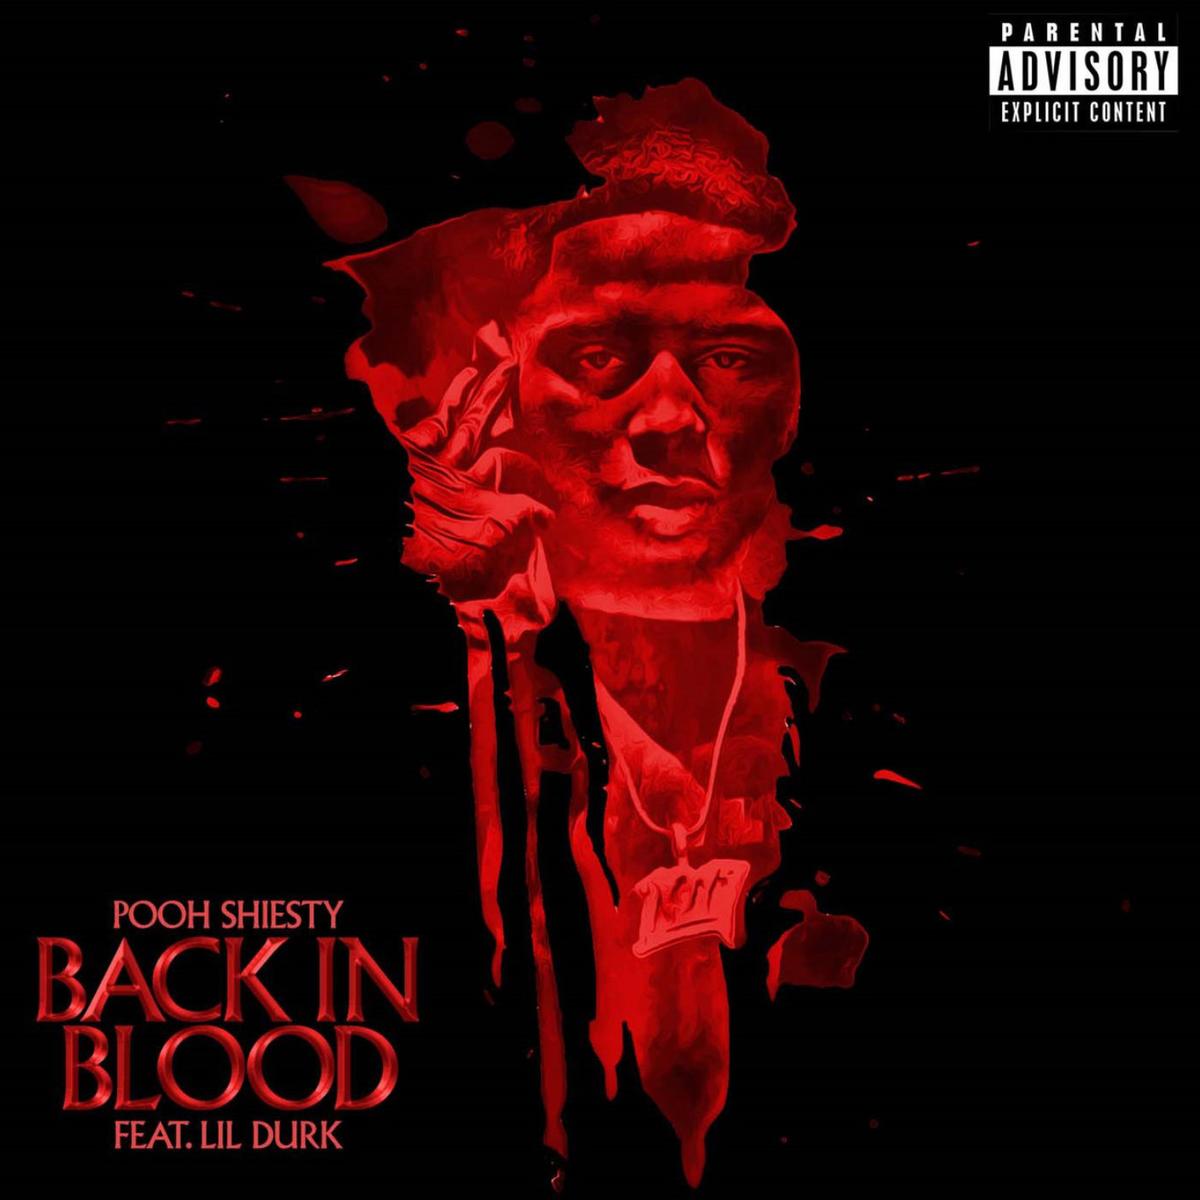 Pooh Shiesty & Lil Durk Join Forces For “Back In Blood”